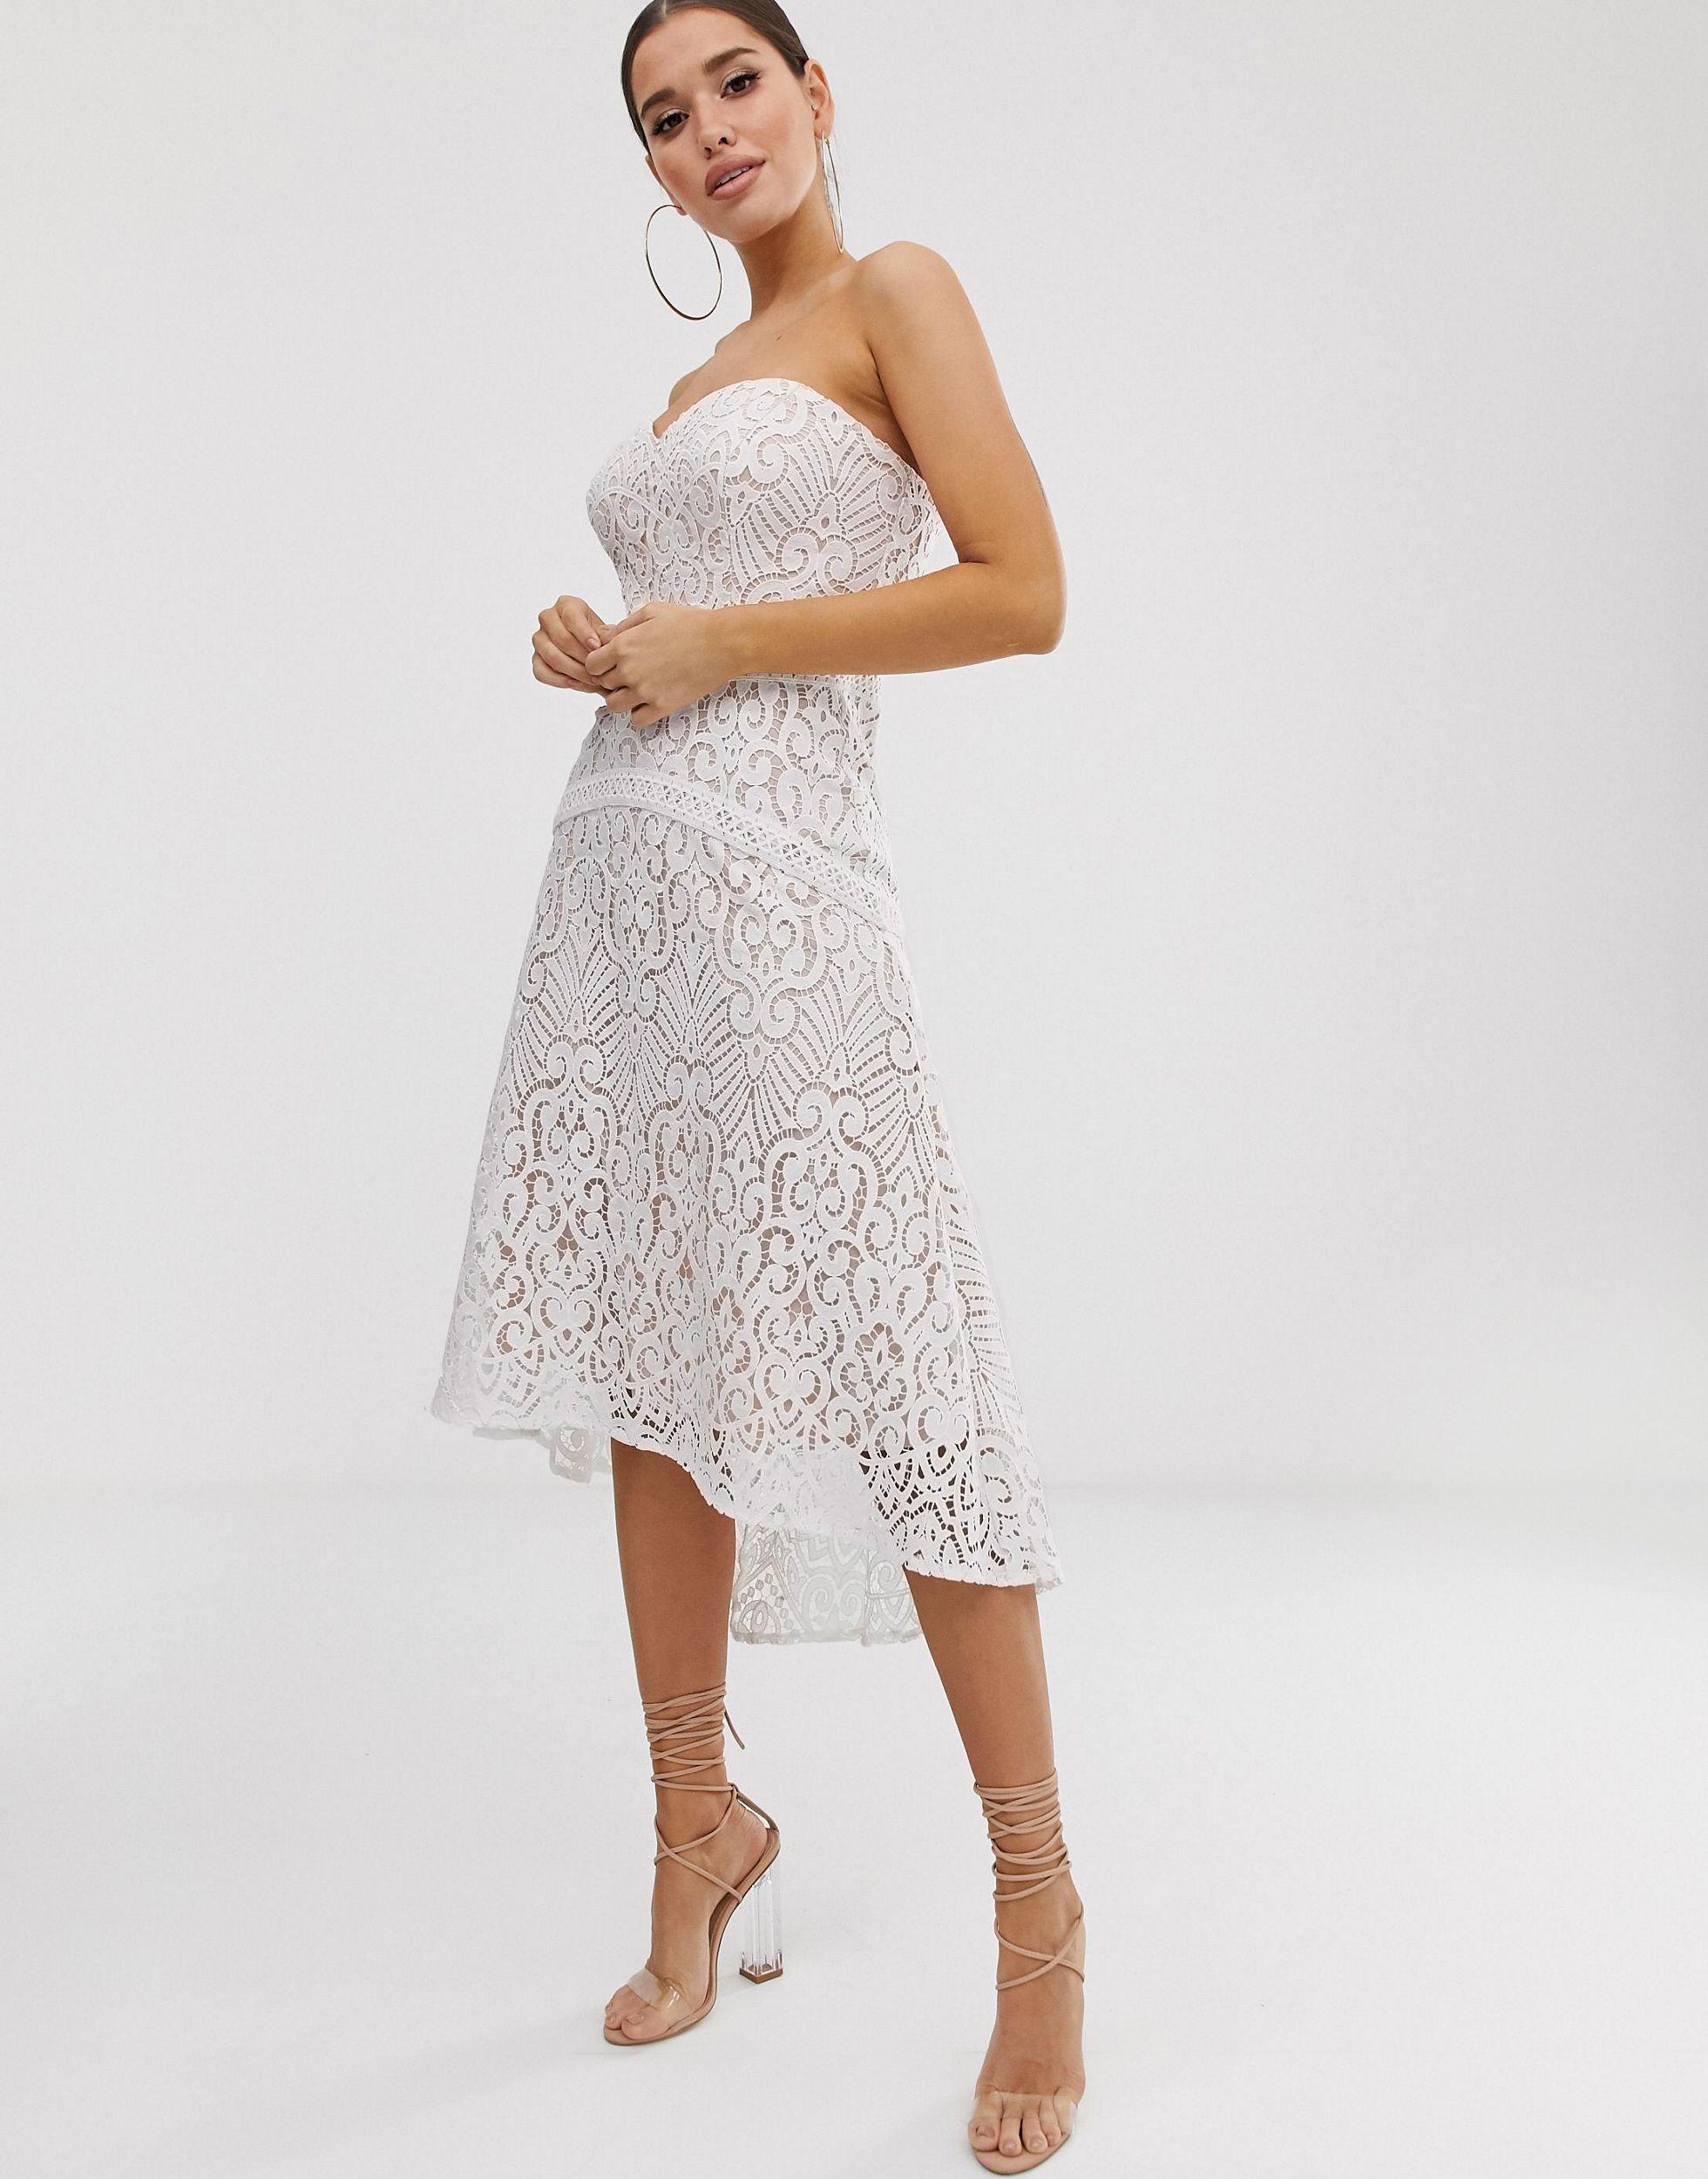 Lipsy Sweetheart All Over Lace Prom Dress in White - Lyst